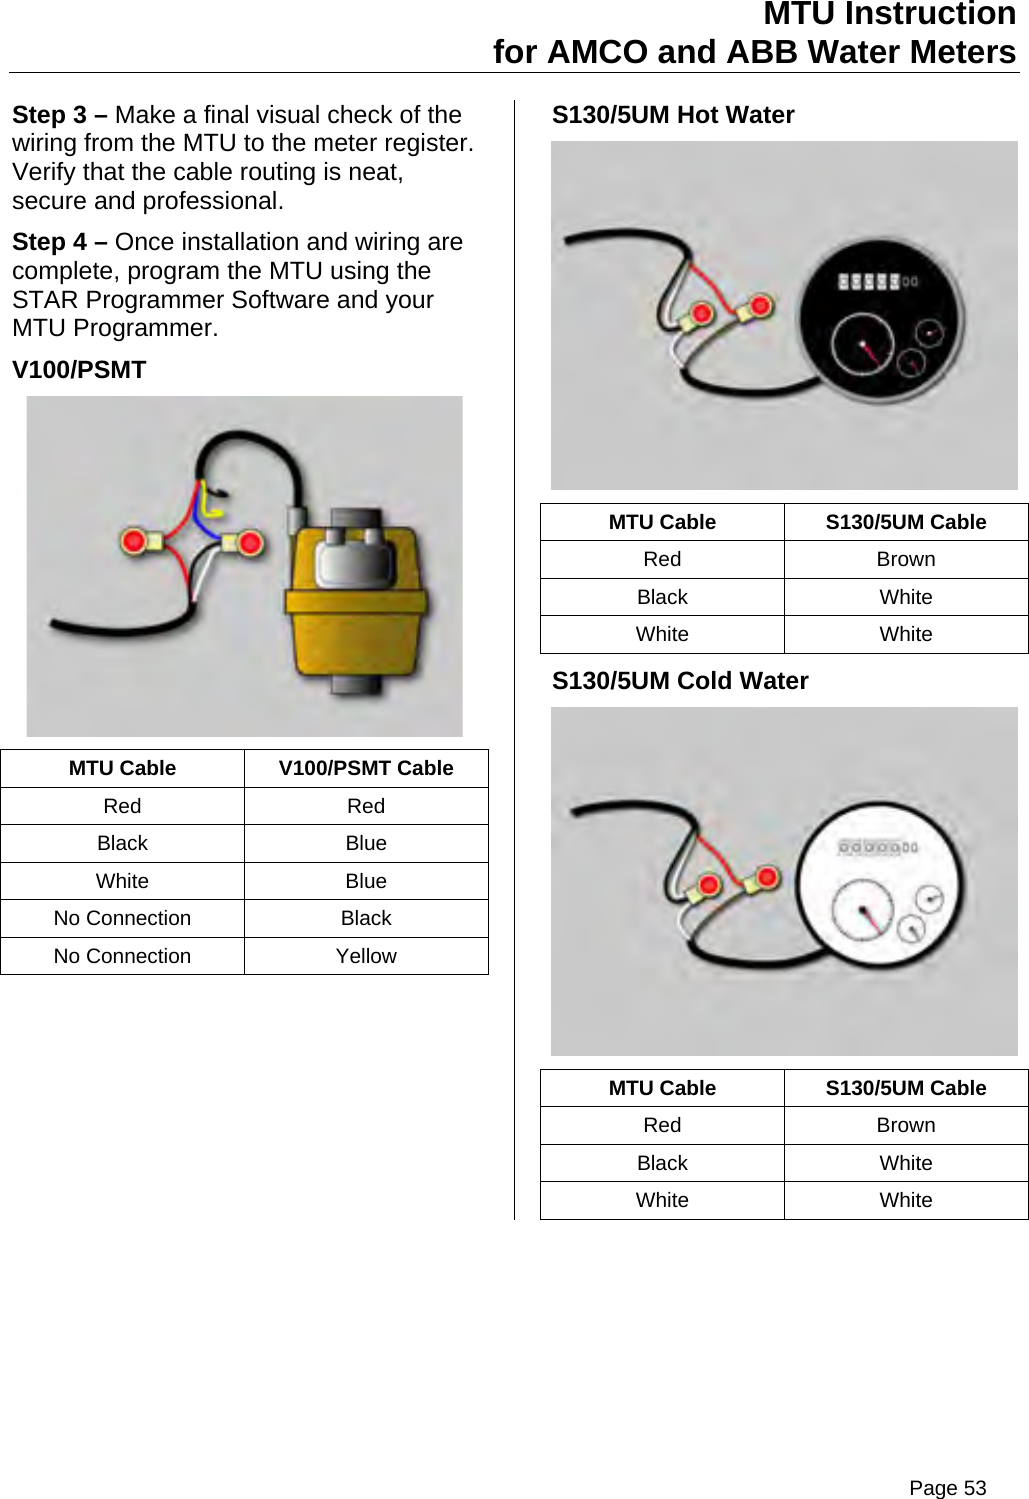 MTU Instruction for AMCO and ABB Water Meters Step 3 – Make a final visual check of the wiring from the MTU to the meter register.  Verify that the cable routing is neat, secure and professional. Step 4 – Once installation and wiring are complete, program the MTU using the STAR Programmer Software and your MTU Programmer. V100/PSMT  MTU Cable  V100/PSMT Cable Red Red Black Blue White Blue No Connection  Black No Connection  Yellow  S130/5UM Hot Water  MTU Cable  S130/5UM Cable Red Brown Black White White White S130/5UM Cold Water  MTU Cable  S130/5UM Cable Red Brown Black White White White Page 53